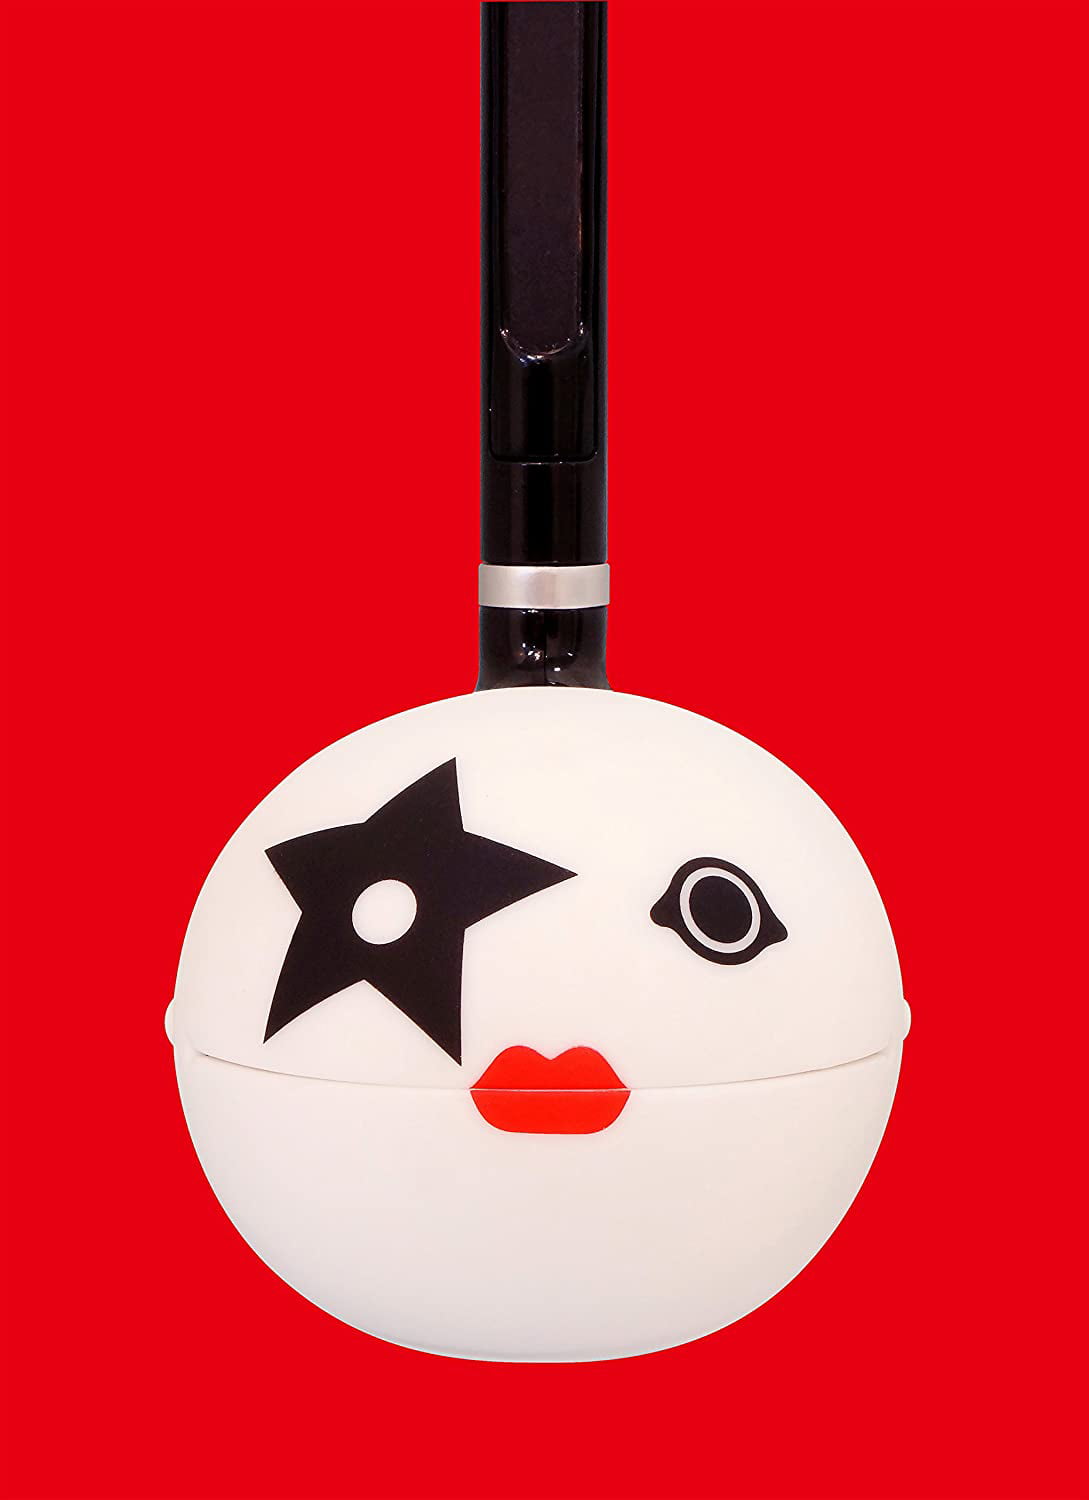 American Rock Band Paul Stanley Signature Japanese Electronic Musical Instrument Portable Synthesizer from Japan by Cube/Maywa Denki Otamatone White Face with Black Body Special KISS Edition 